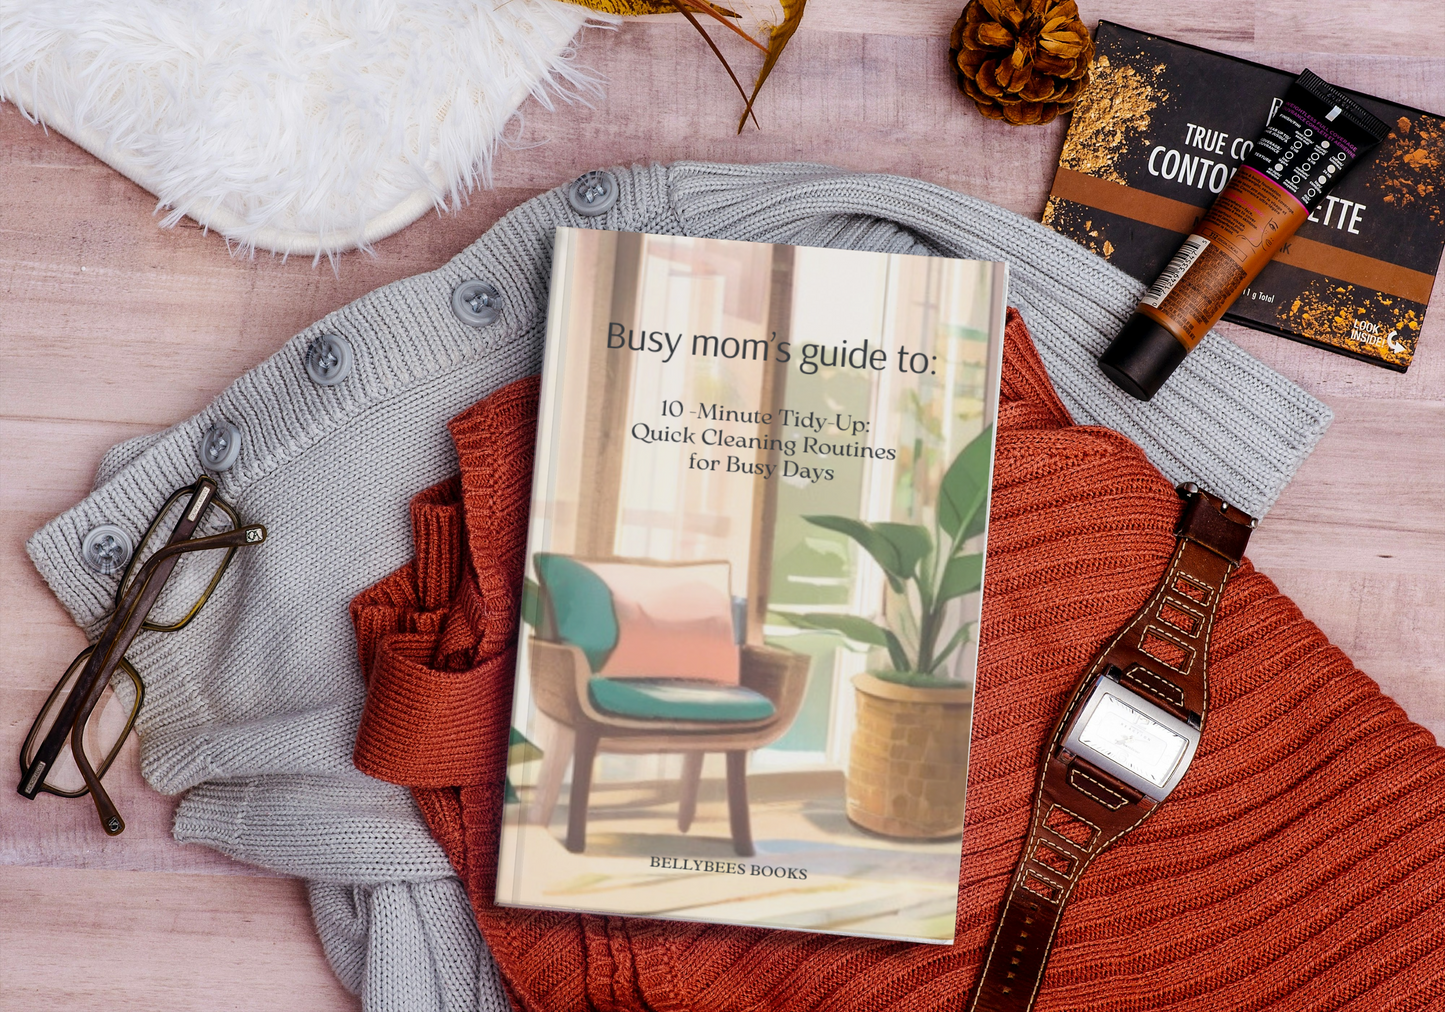 Busy moms guide to 10-Minute Tidy-Up: Quick Cleaning Routines for Busy Days E-BOOK